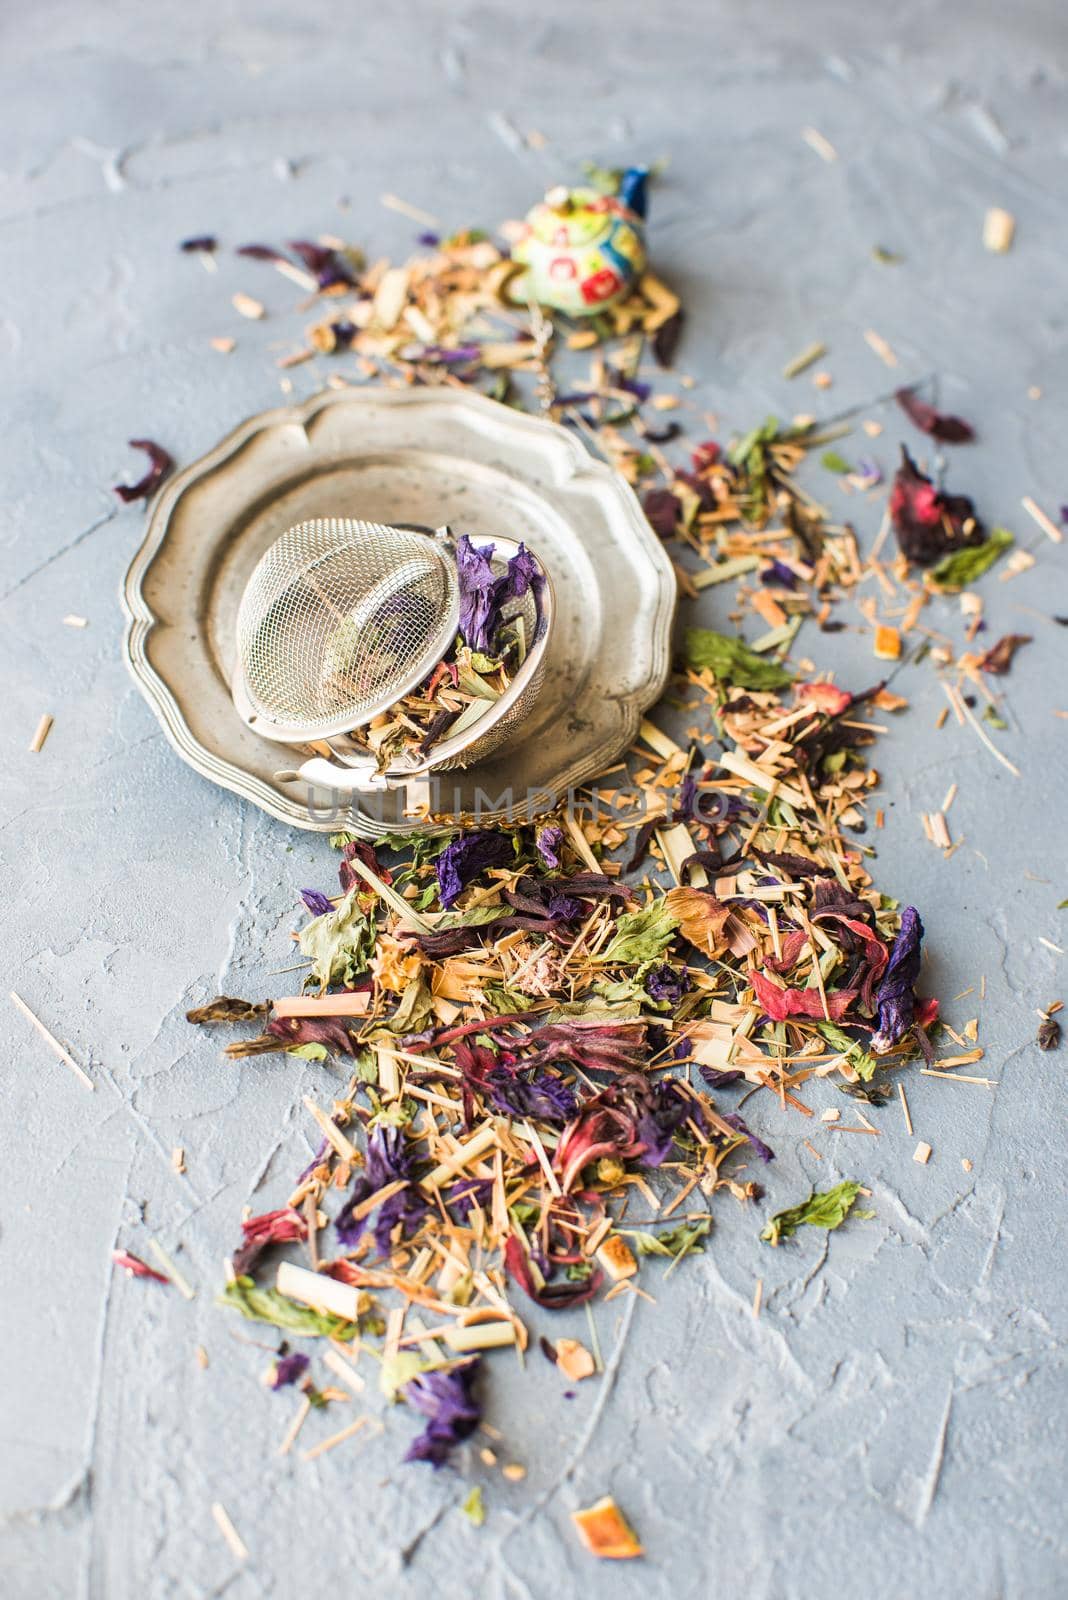 Dry tea leaves with flowersand fruits on wooden background with copyspace as a organic tea concept